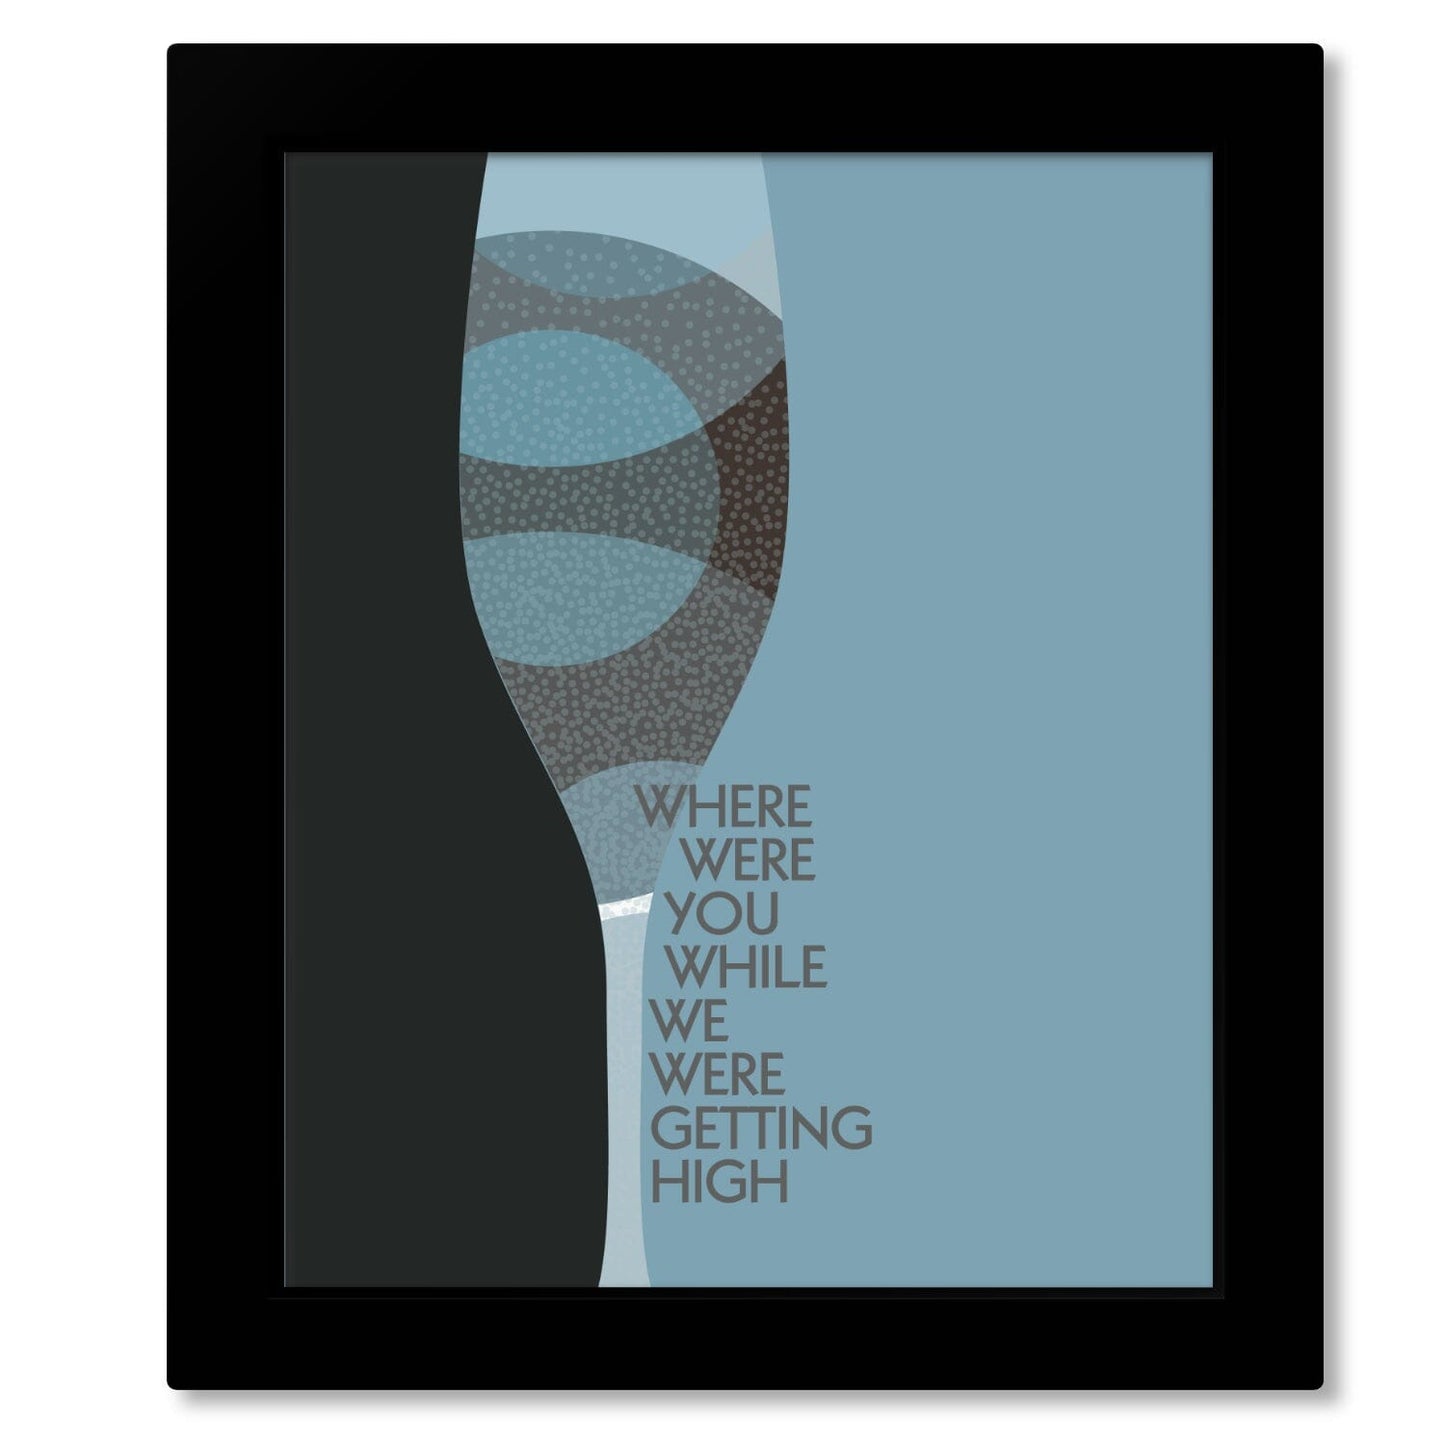 Champagne Supernova by Oasis - Song Lyrics Music Art Print Song Lyrics Art Song Lyrics Art 8x10 Framed Print (without mat) 